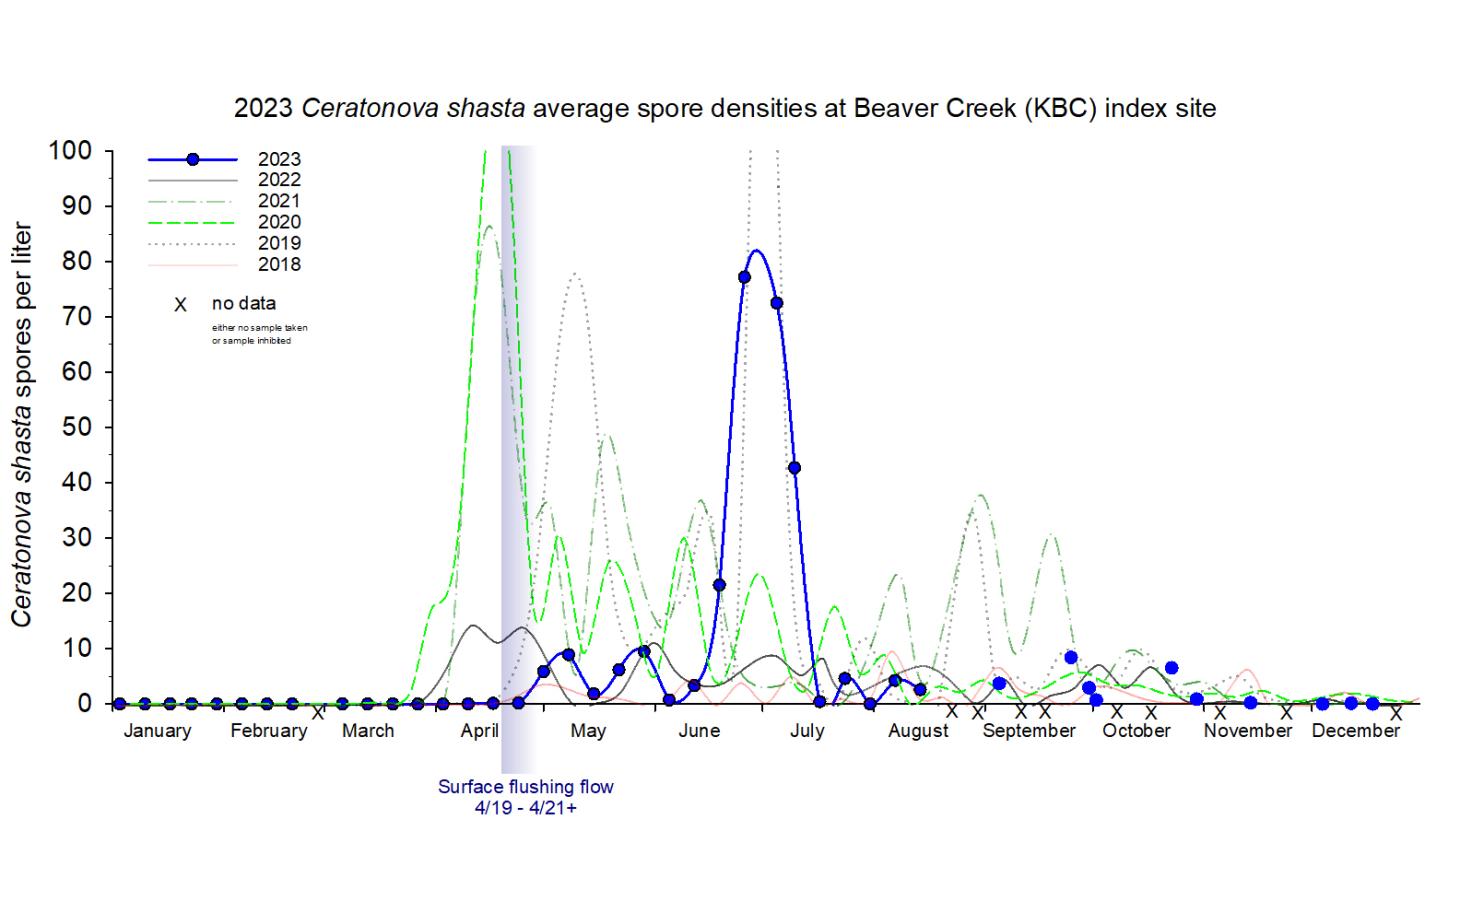 Graph showing the density of waterborne Ceratonova shasta at the Beaver Creek index site in 2023.